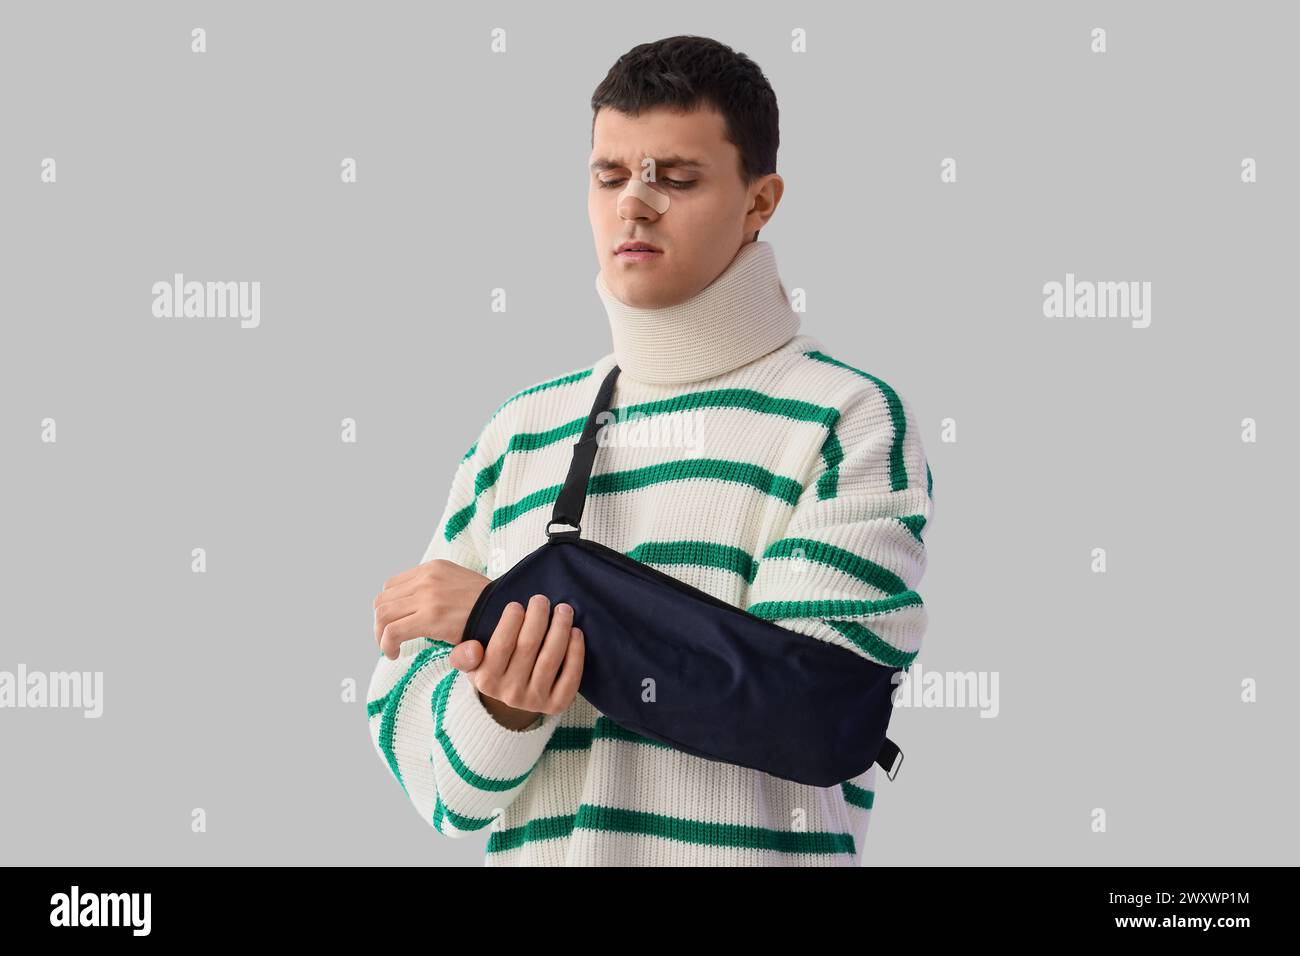 Injured young man after accident with broken arm on light background Stock Photo